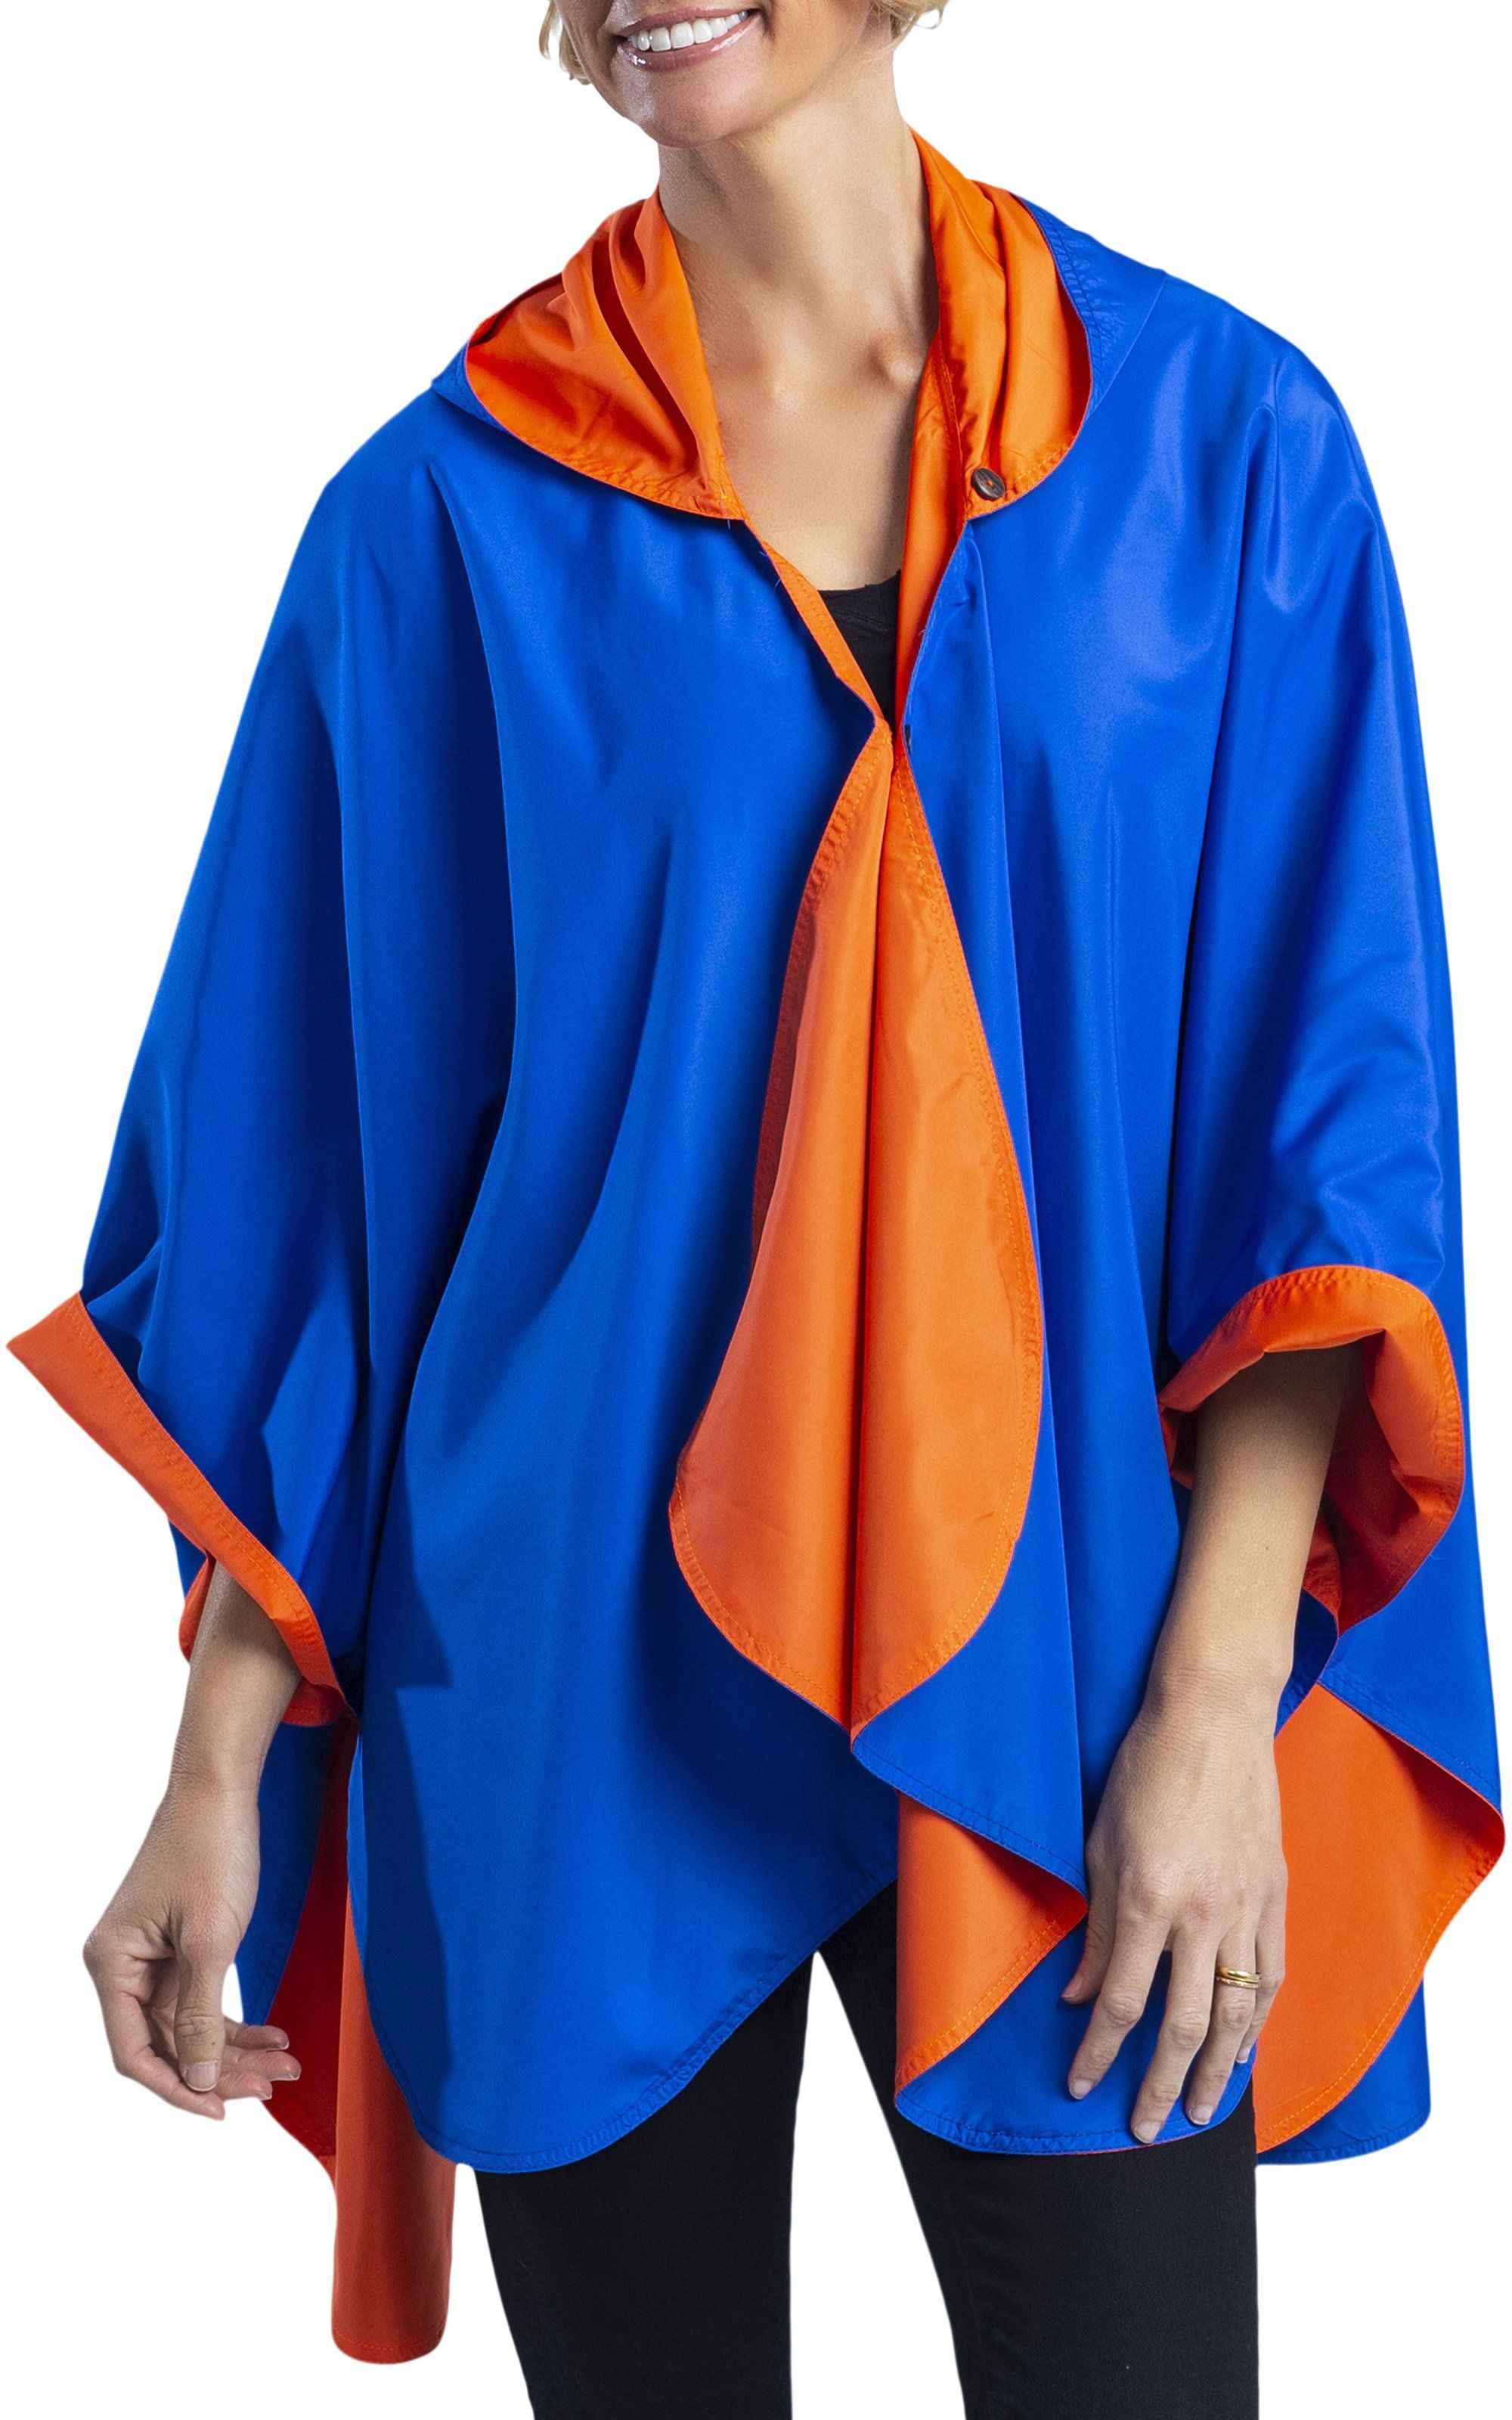  Woman wearing a Royal Blue & Orange Wind & Rainproof Cheer Cape with the Royal Blue side out, revealing the Orange print at the lapels,neckline and cuffs